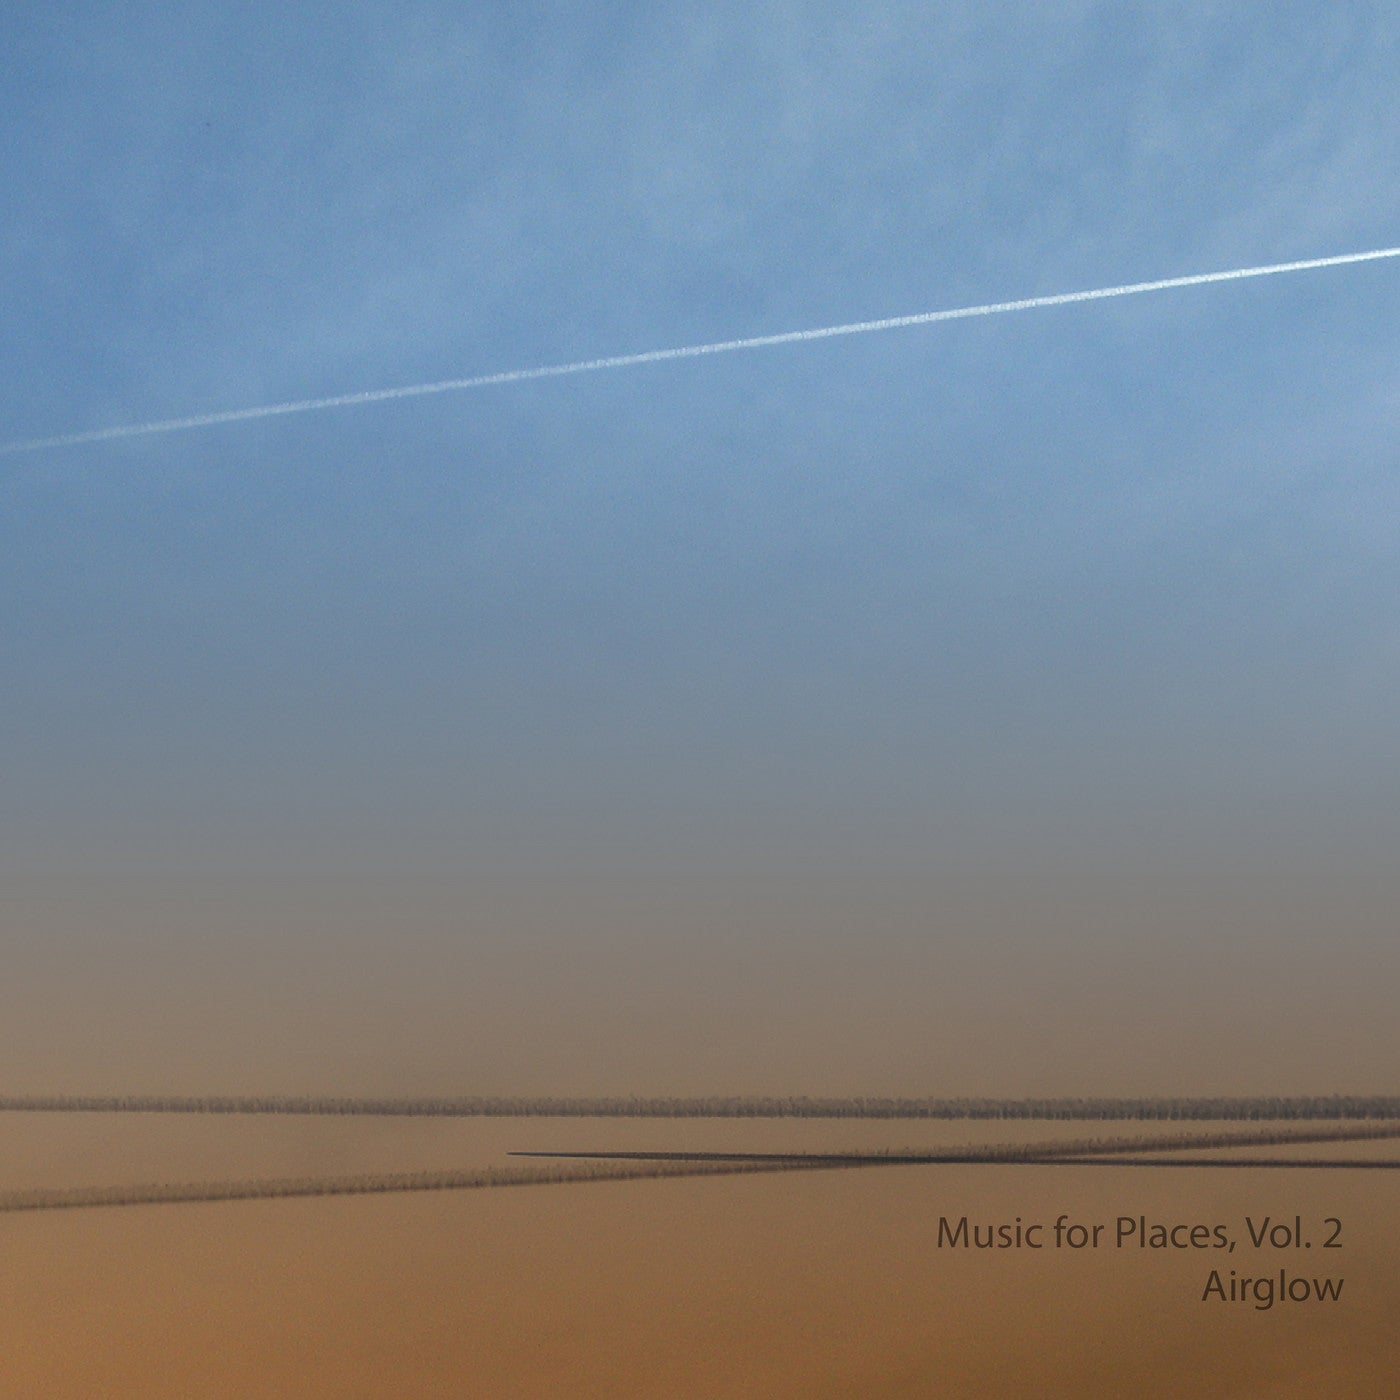 Music for Places, Vol. 2 Airglow